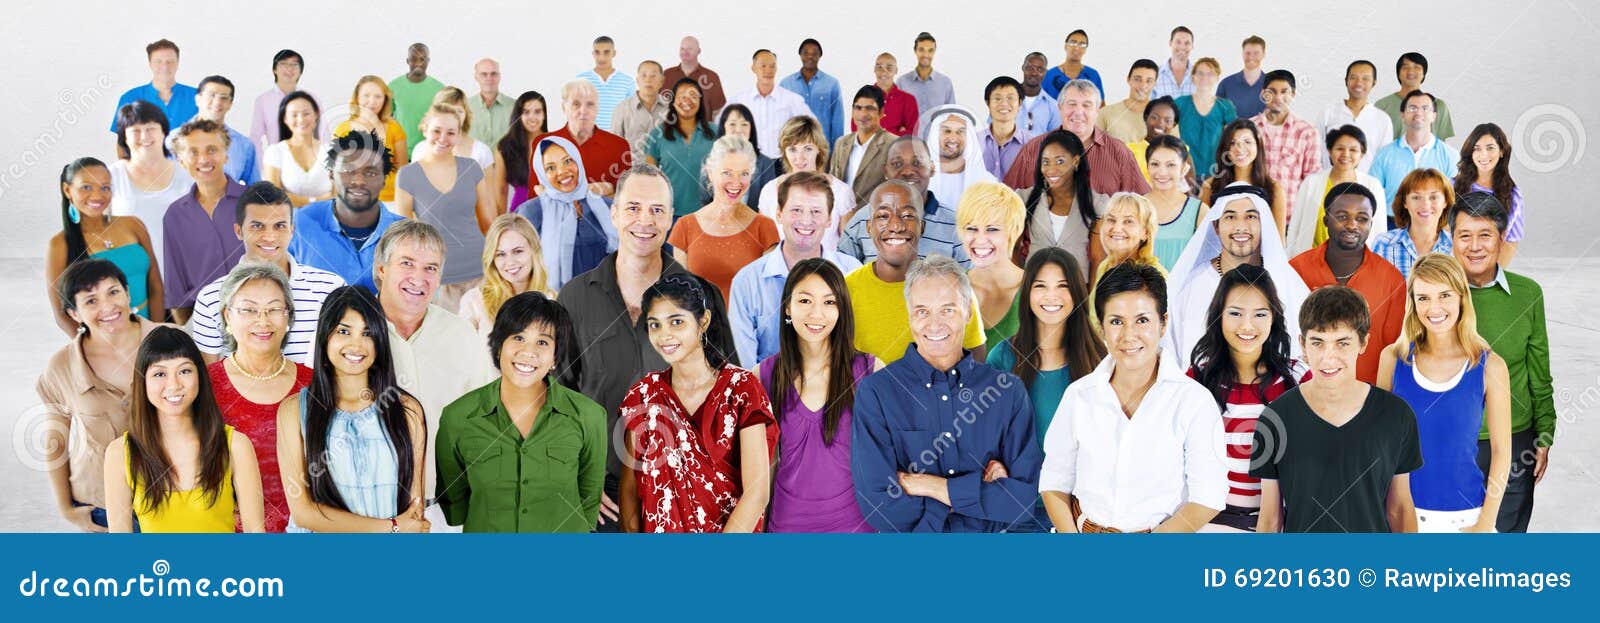 diversity large group of people multiethnic concept